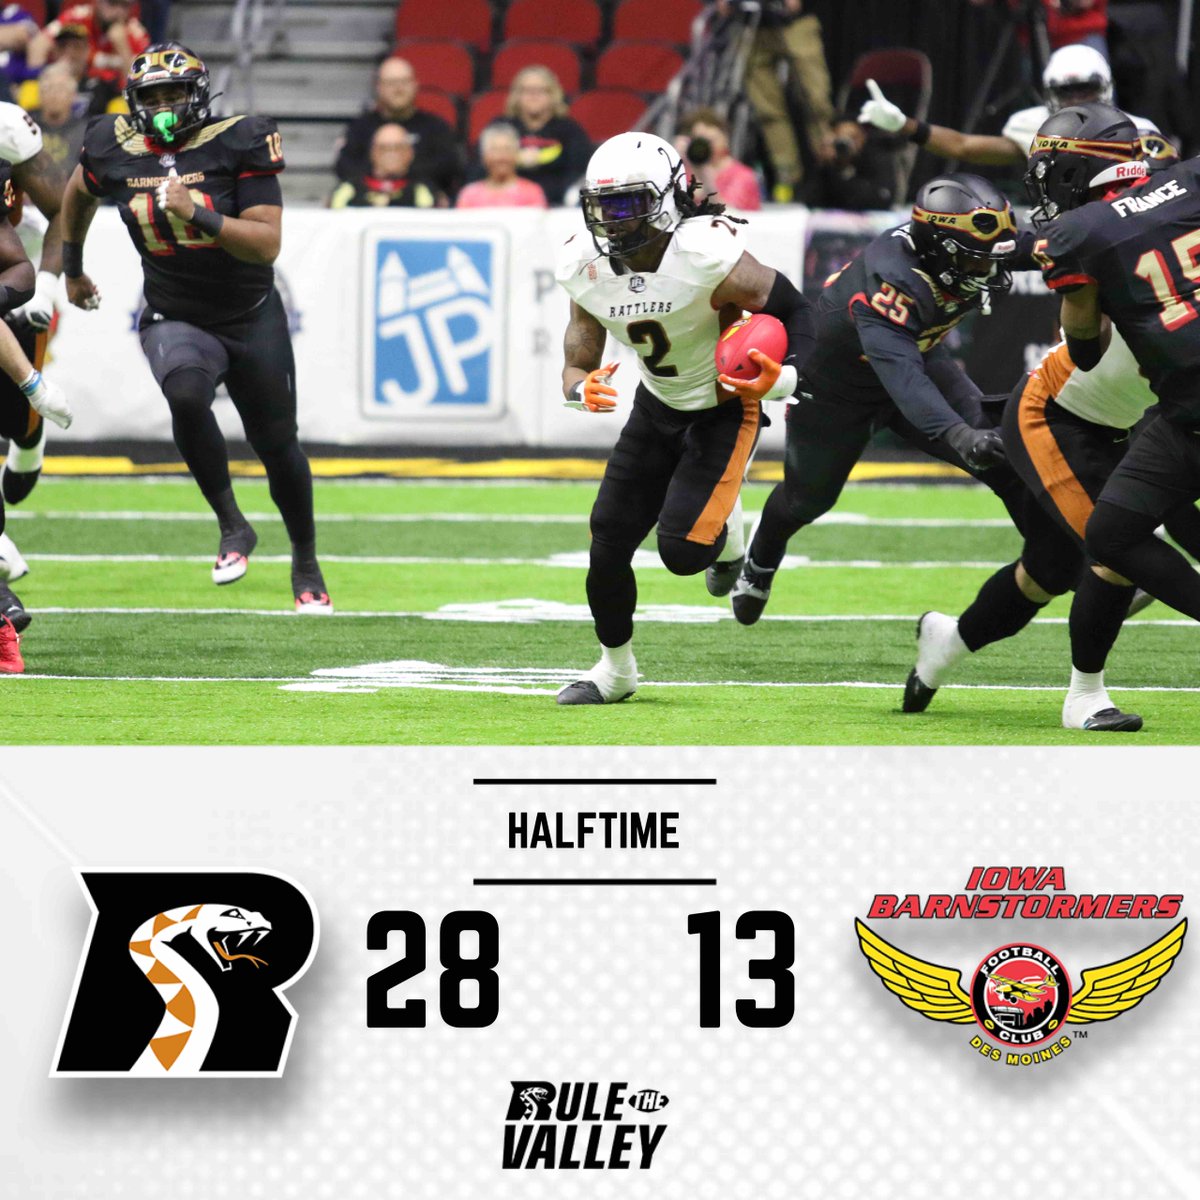 Not bad for a first half👀
LET’S GO RATTLERS 🏈